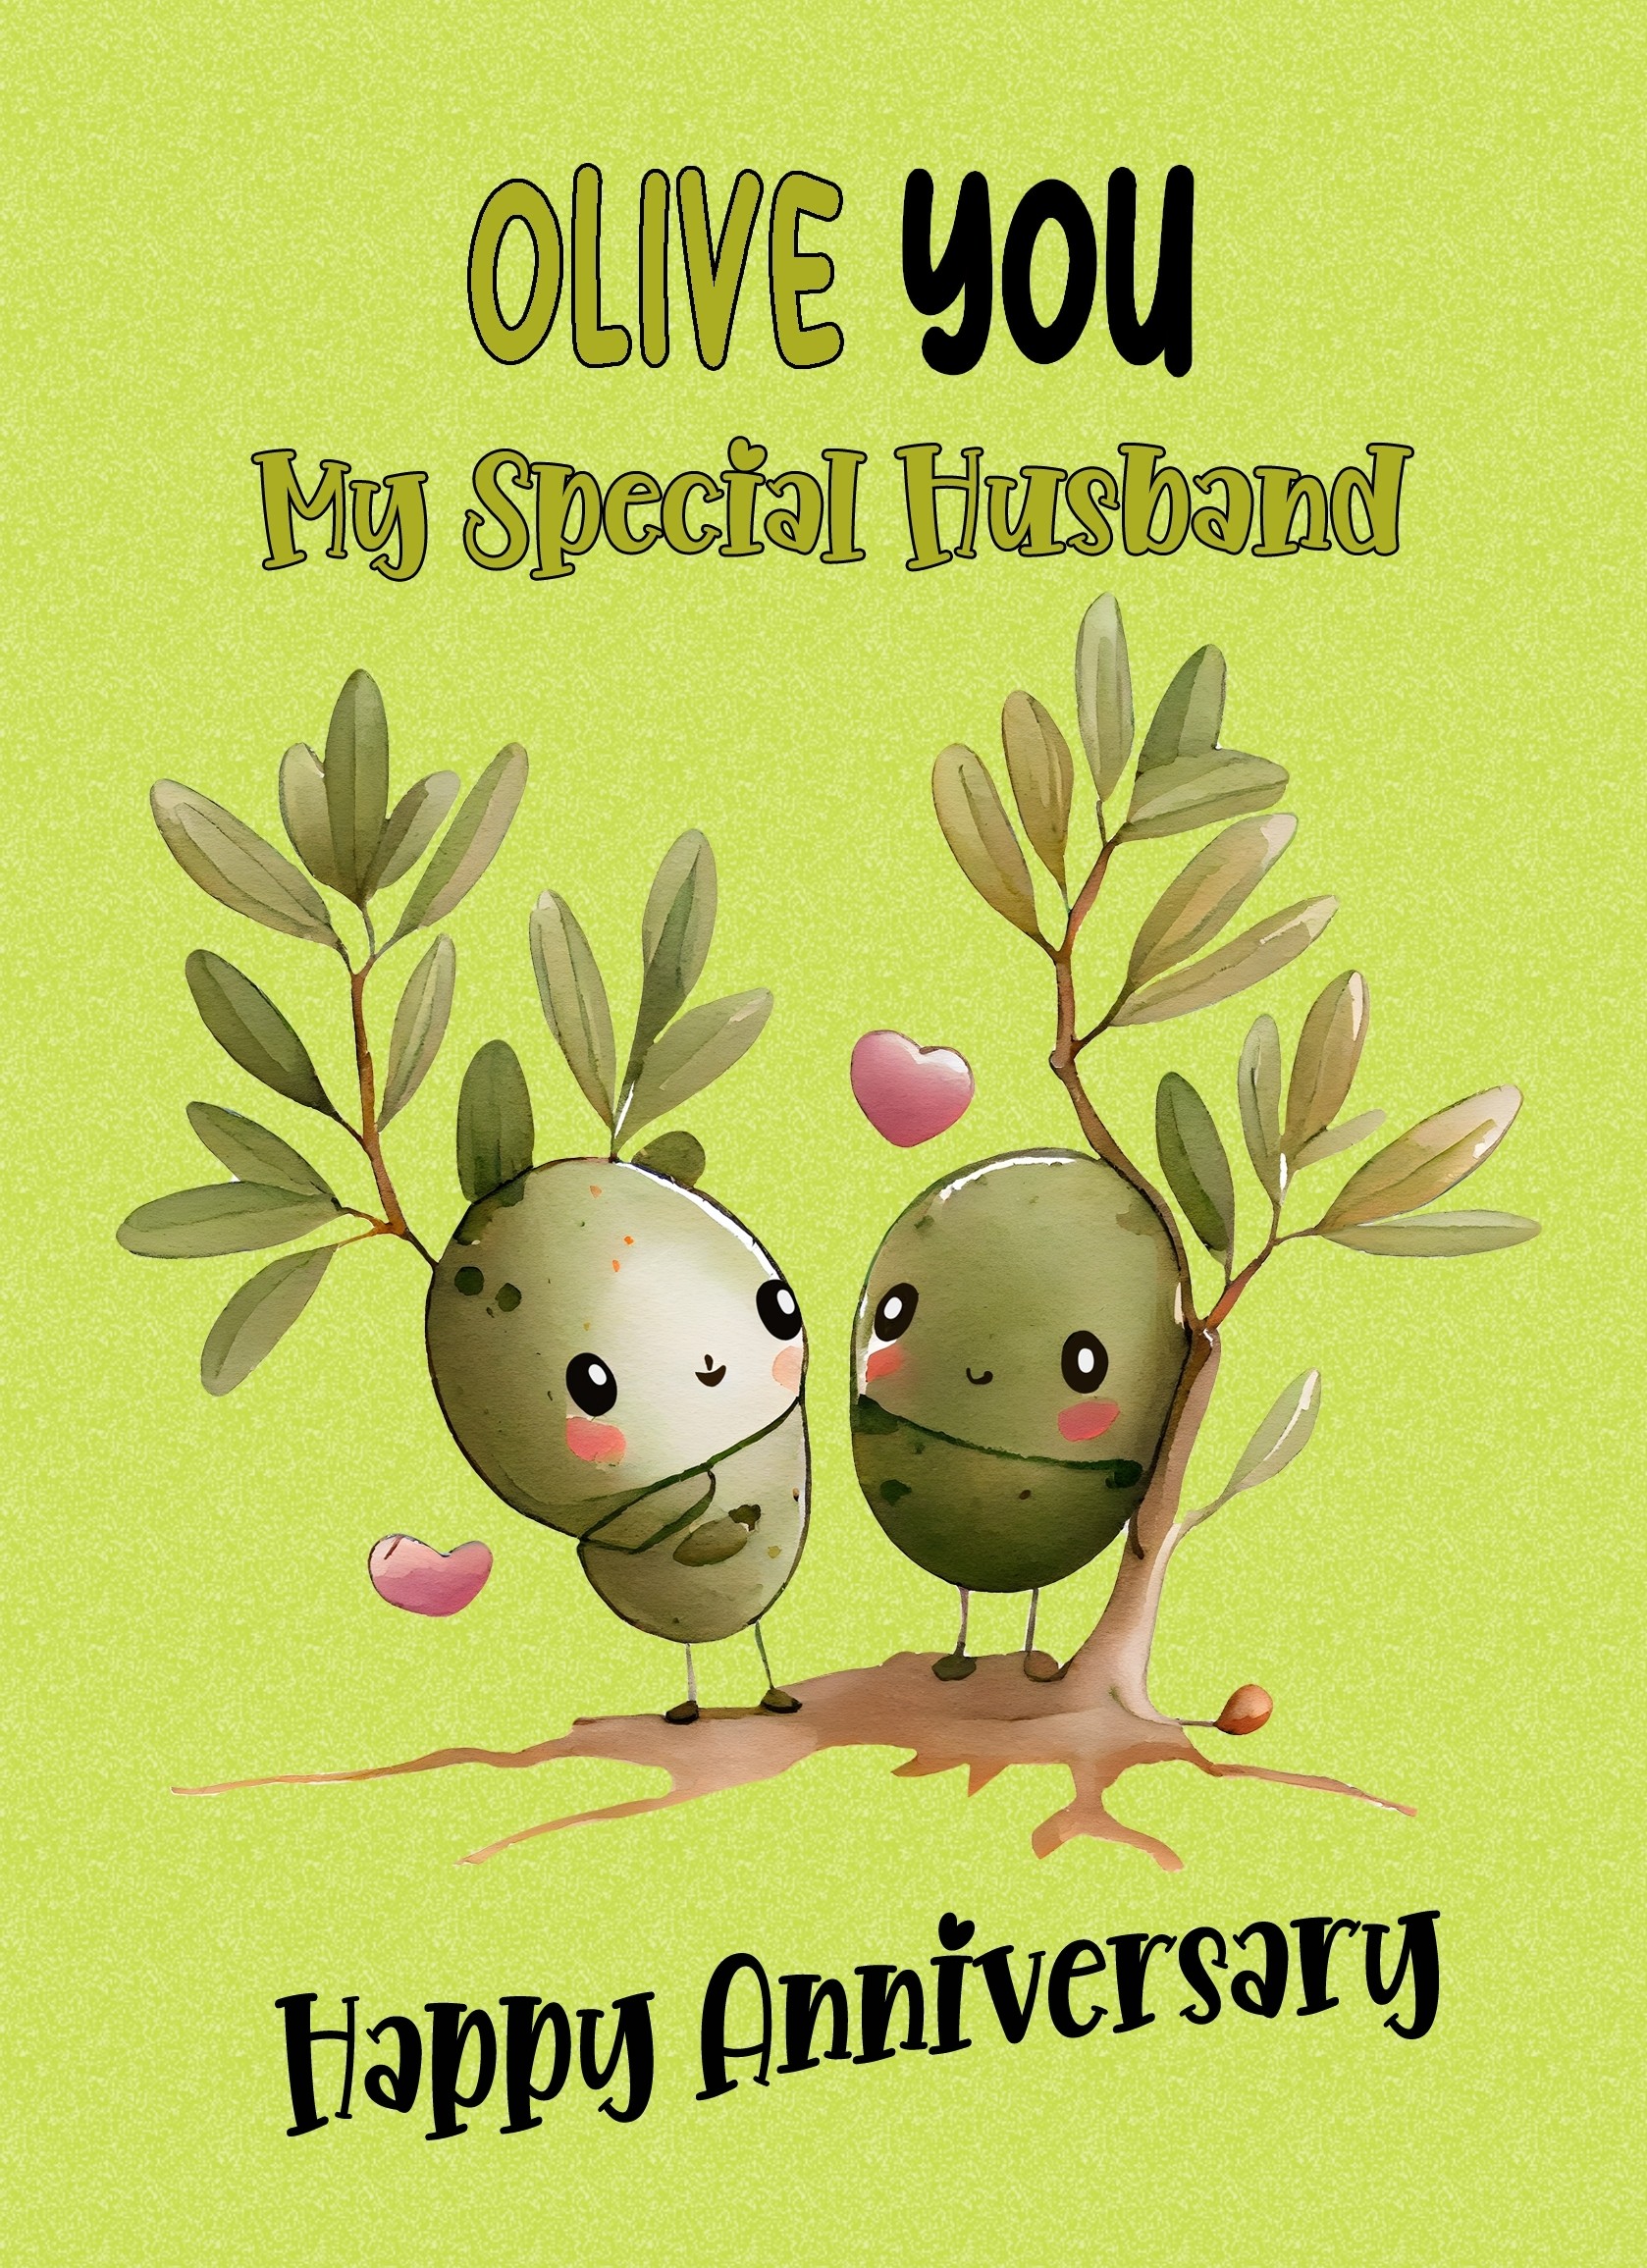 Funny Pun Romantic Anniversary Card for Husband (Olive You)